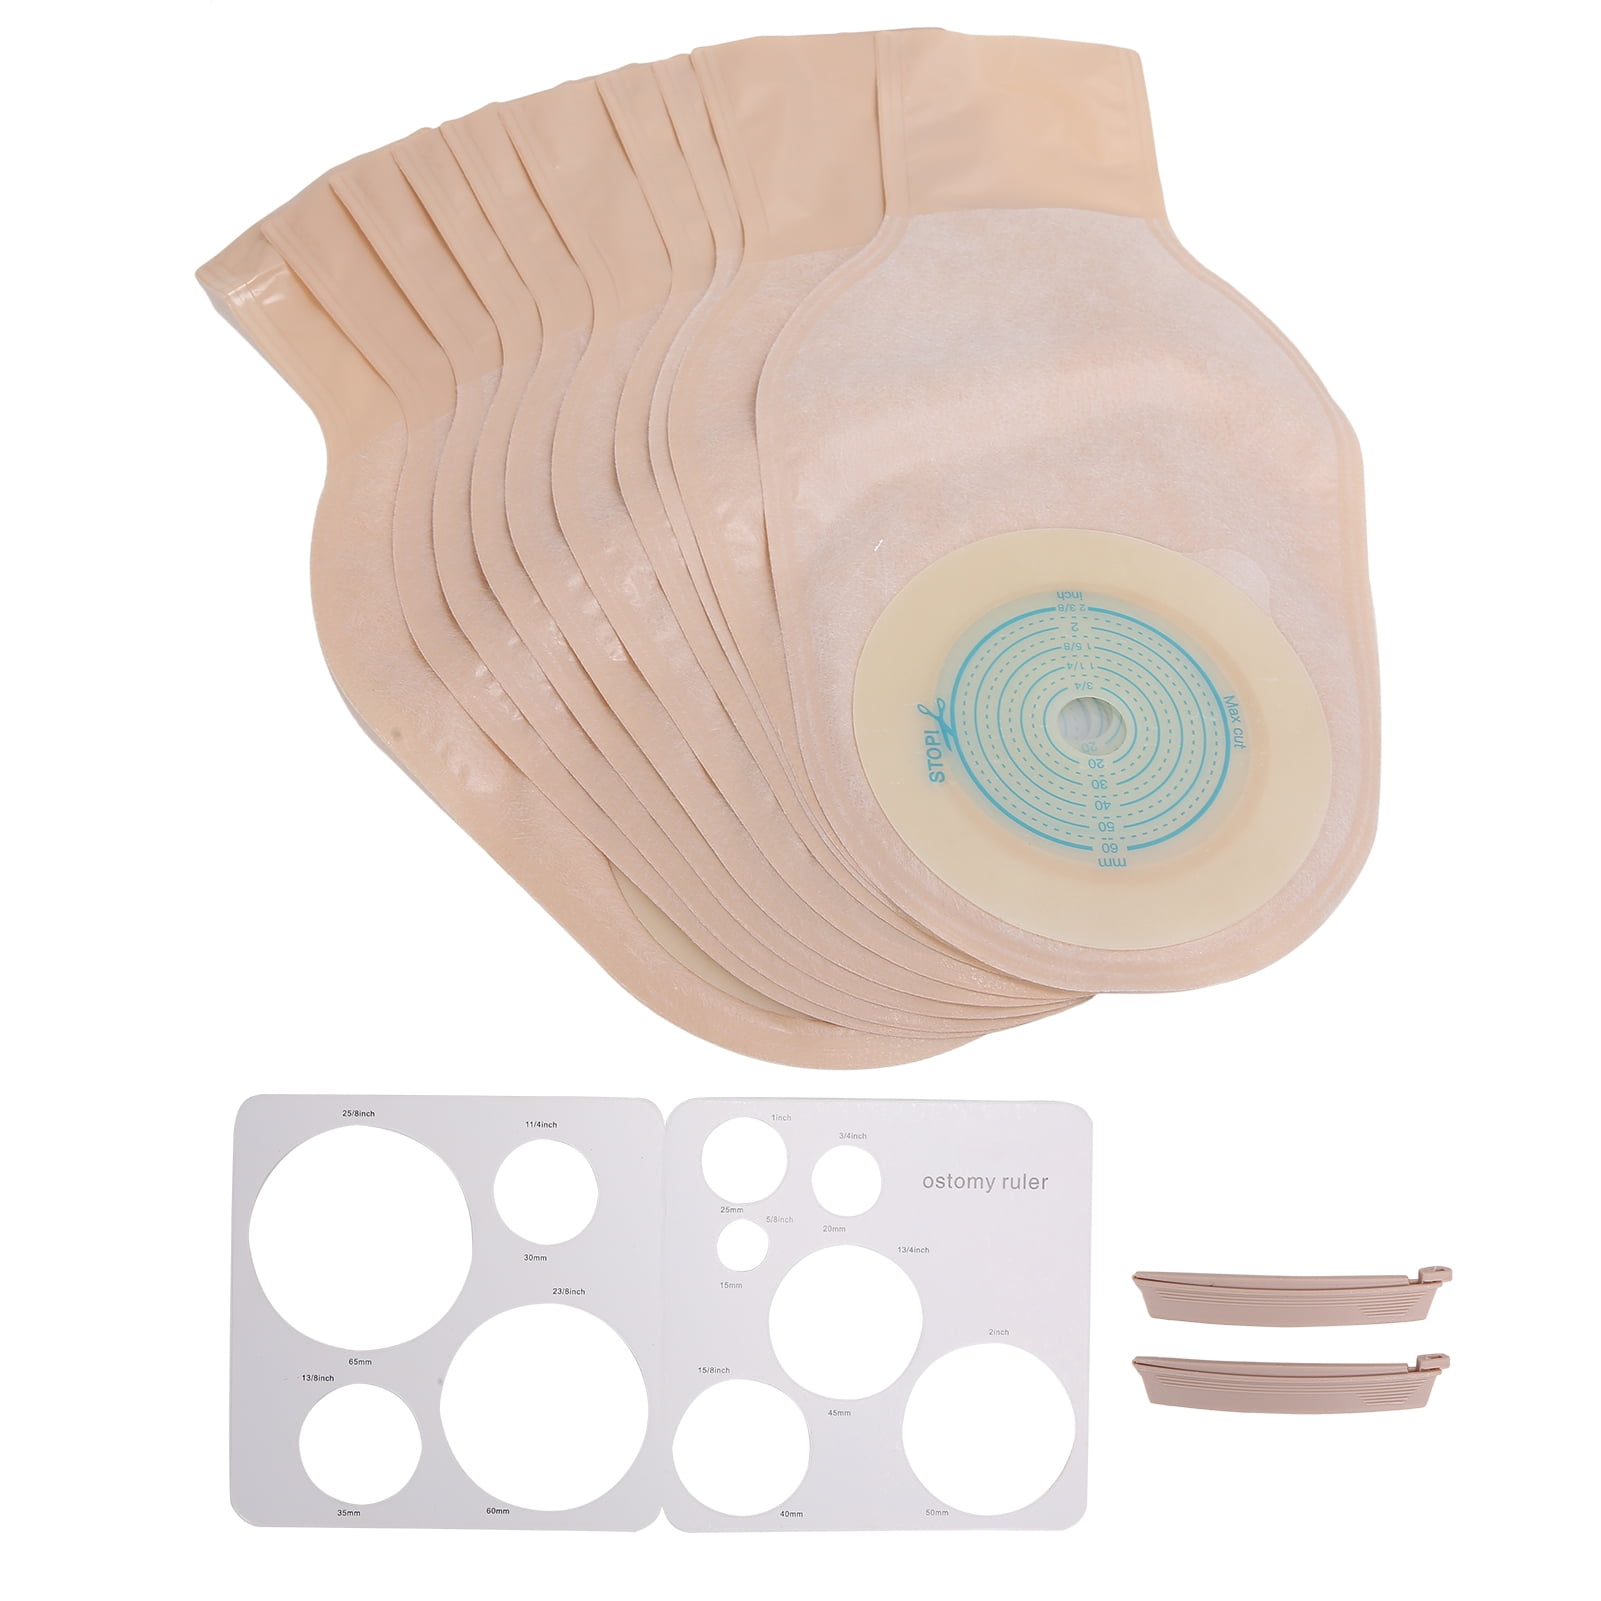 ESTINK 10pcs Ostomy Bag One‑Piece Disposable Colostomy Bags Ostomy ...